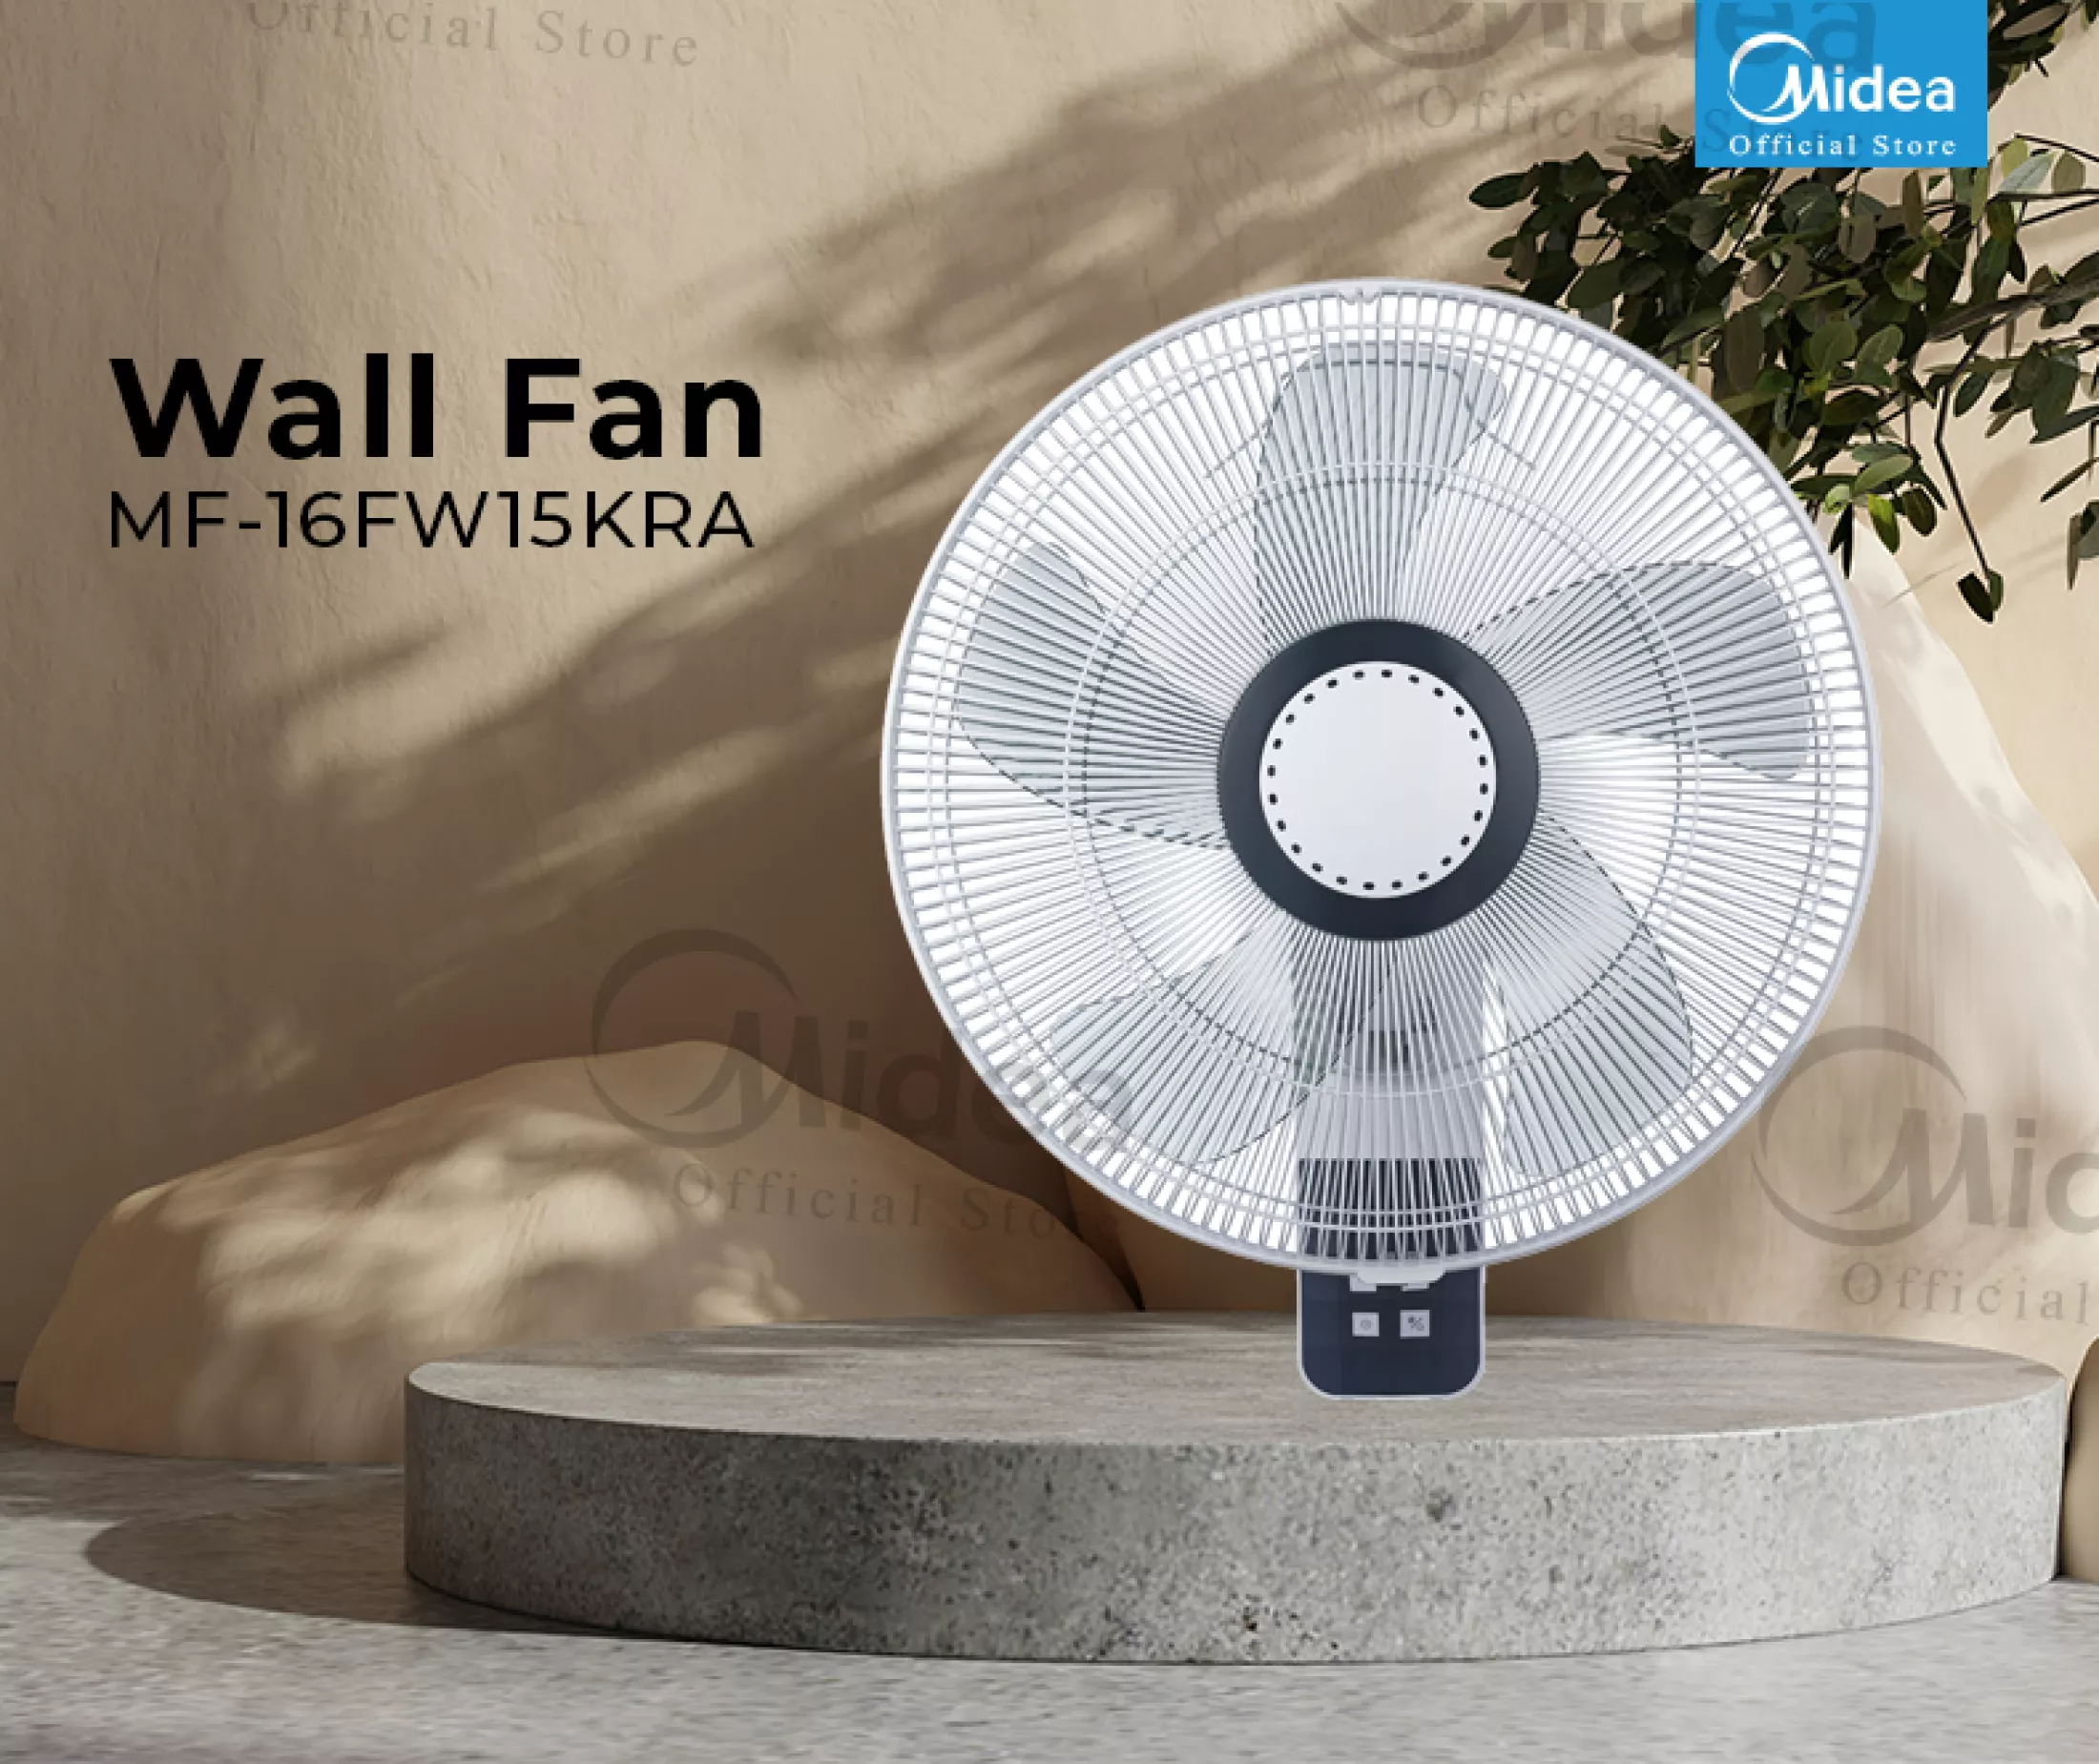 Midea 16 Wall Fan With Remote Control Mf 16fw15kra A E S Electrical Superstore